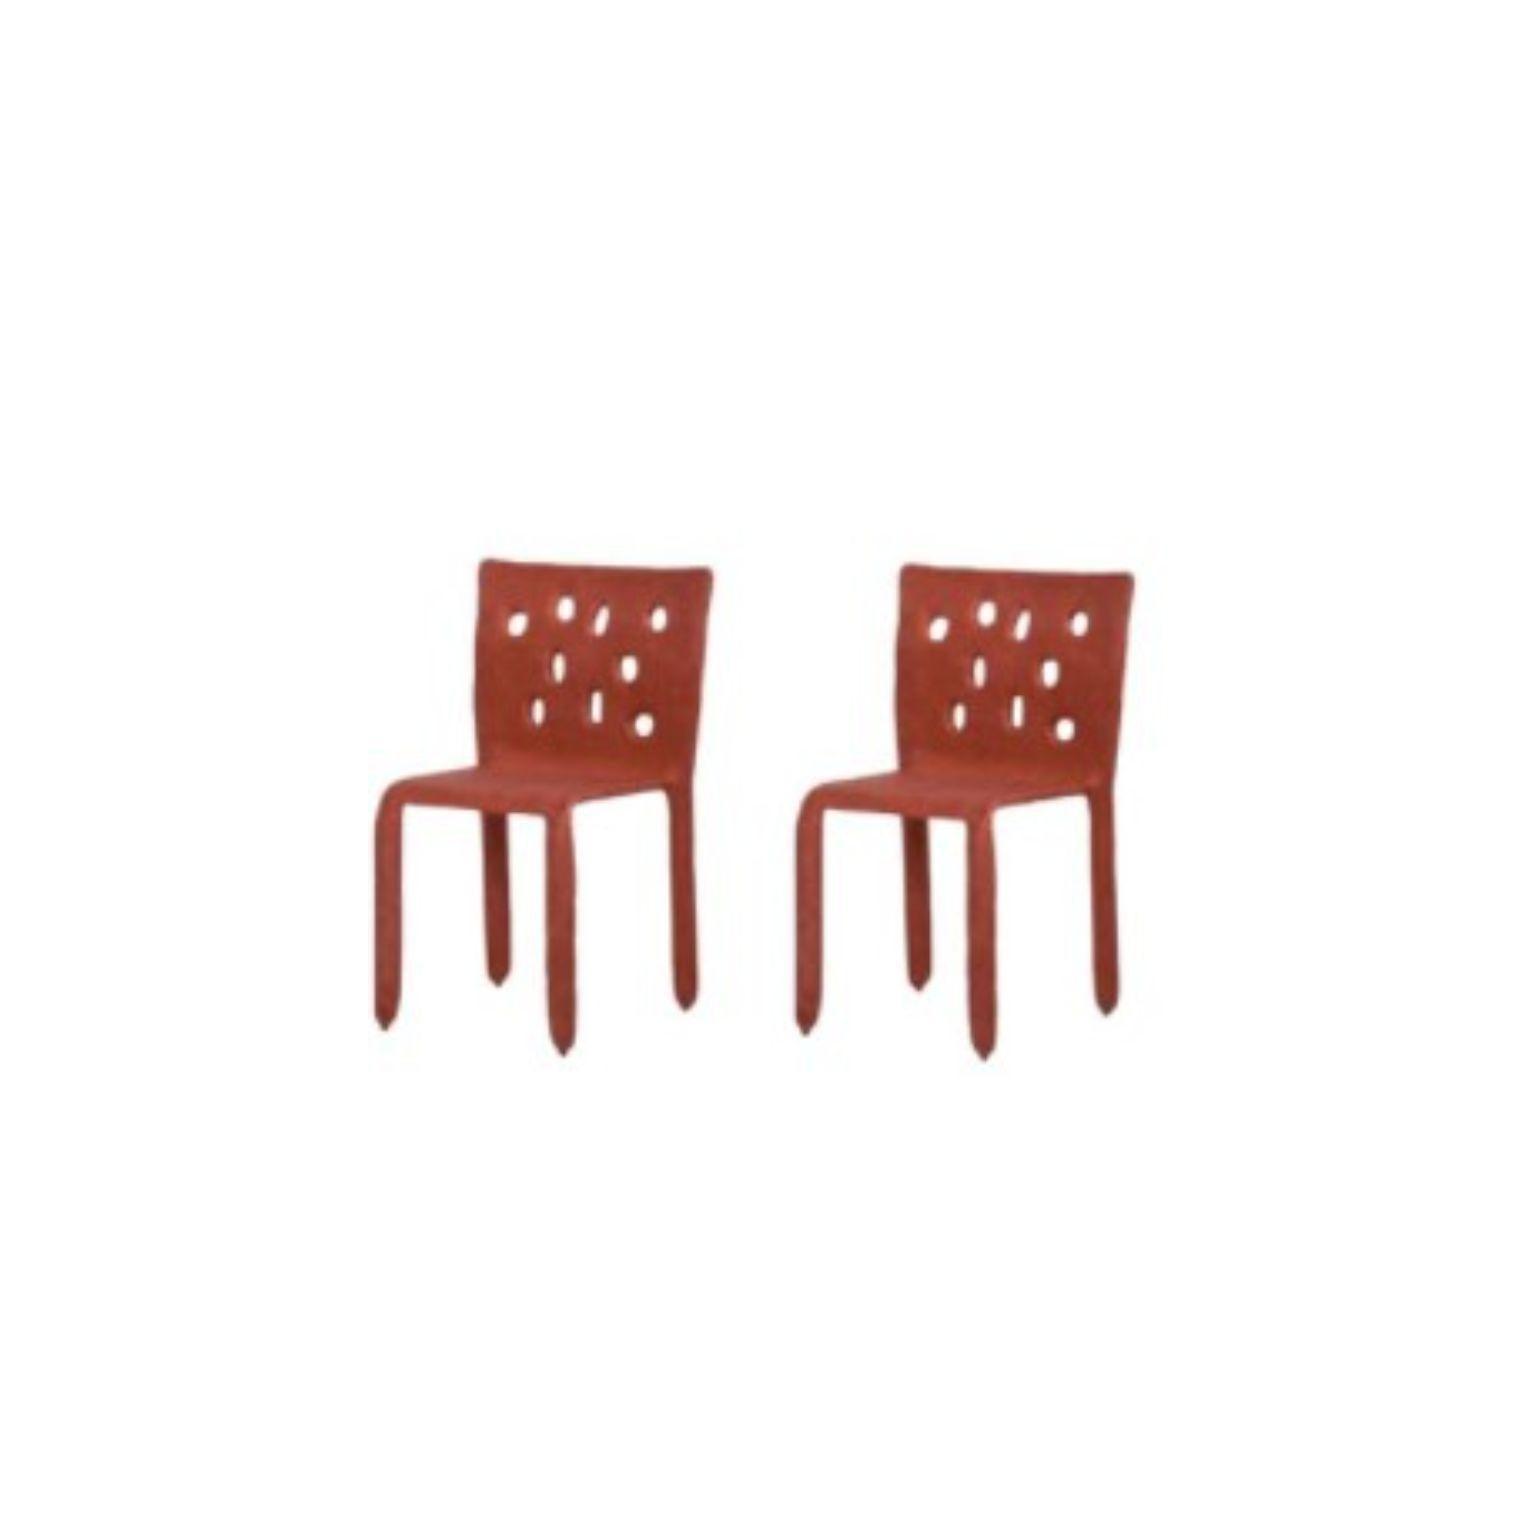 Set of 2 Red Sculpted Contemporary Chairs by FAINA
Design: Victoriya Yakusha
Material: steel, flax rubber, biopolymer, cellulose
Dimensions: Height 82 x width 54 x legs depth 45 cm
 Weight: 15 kilos.

Made in the style of ethnic minimalism,